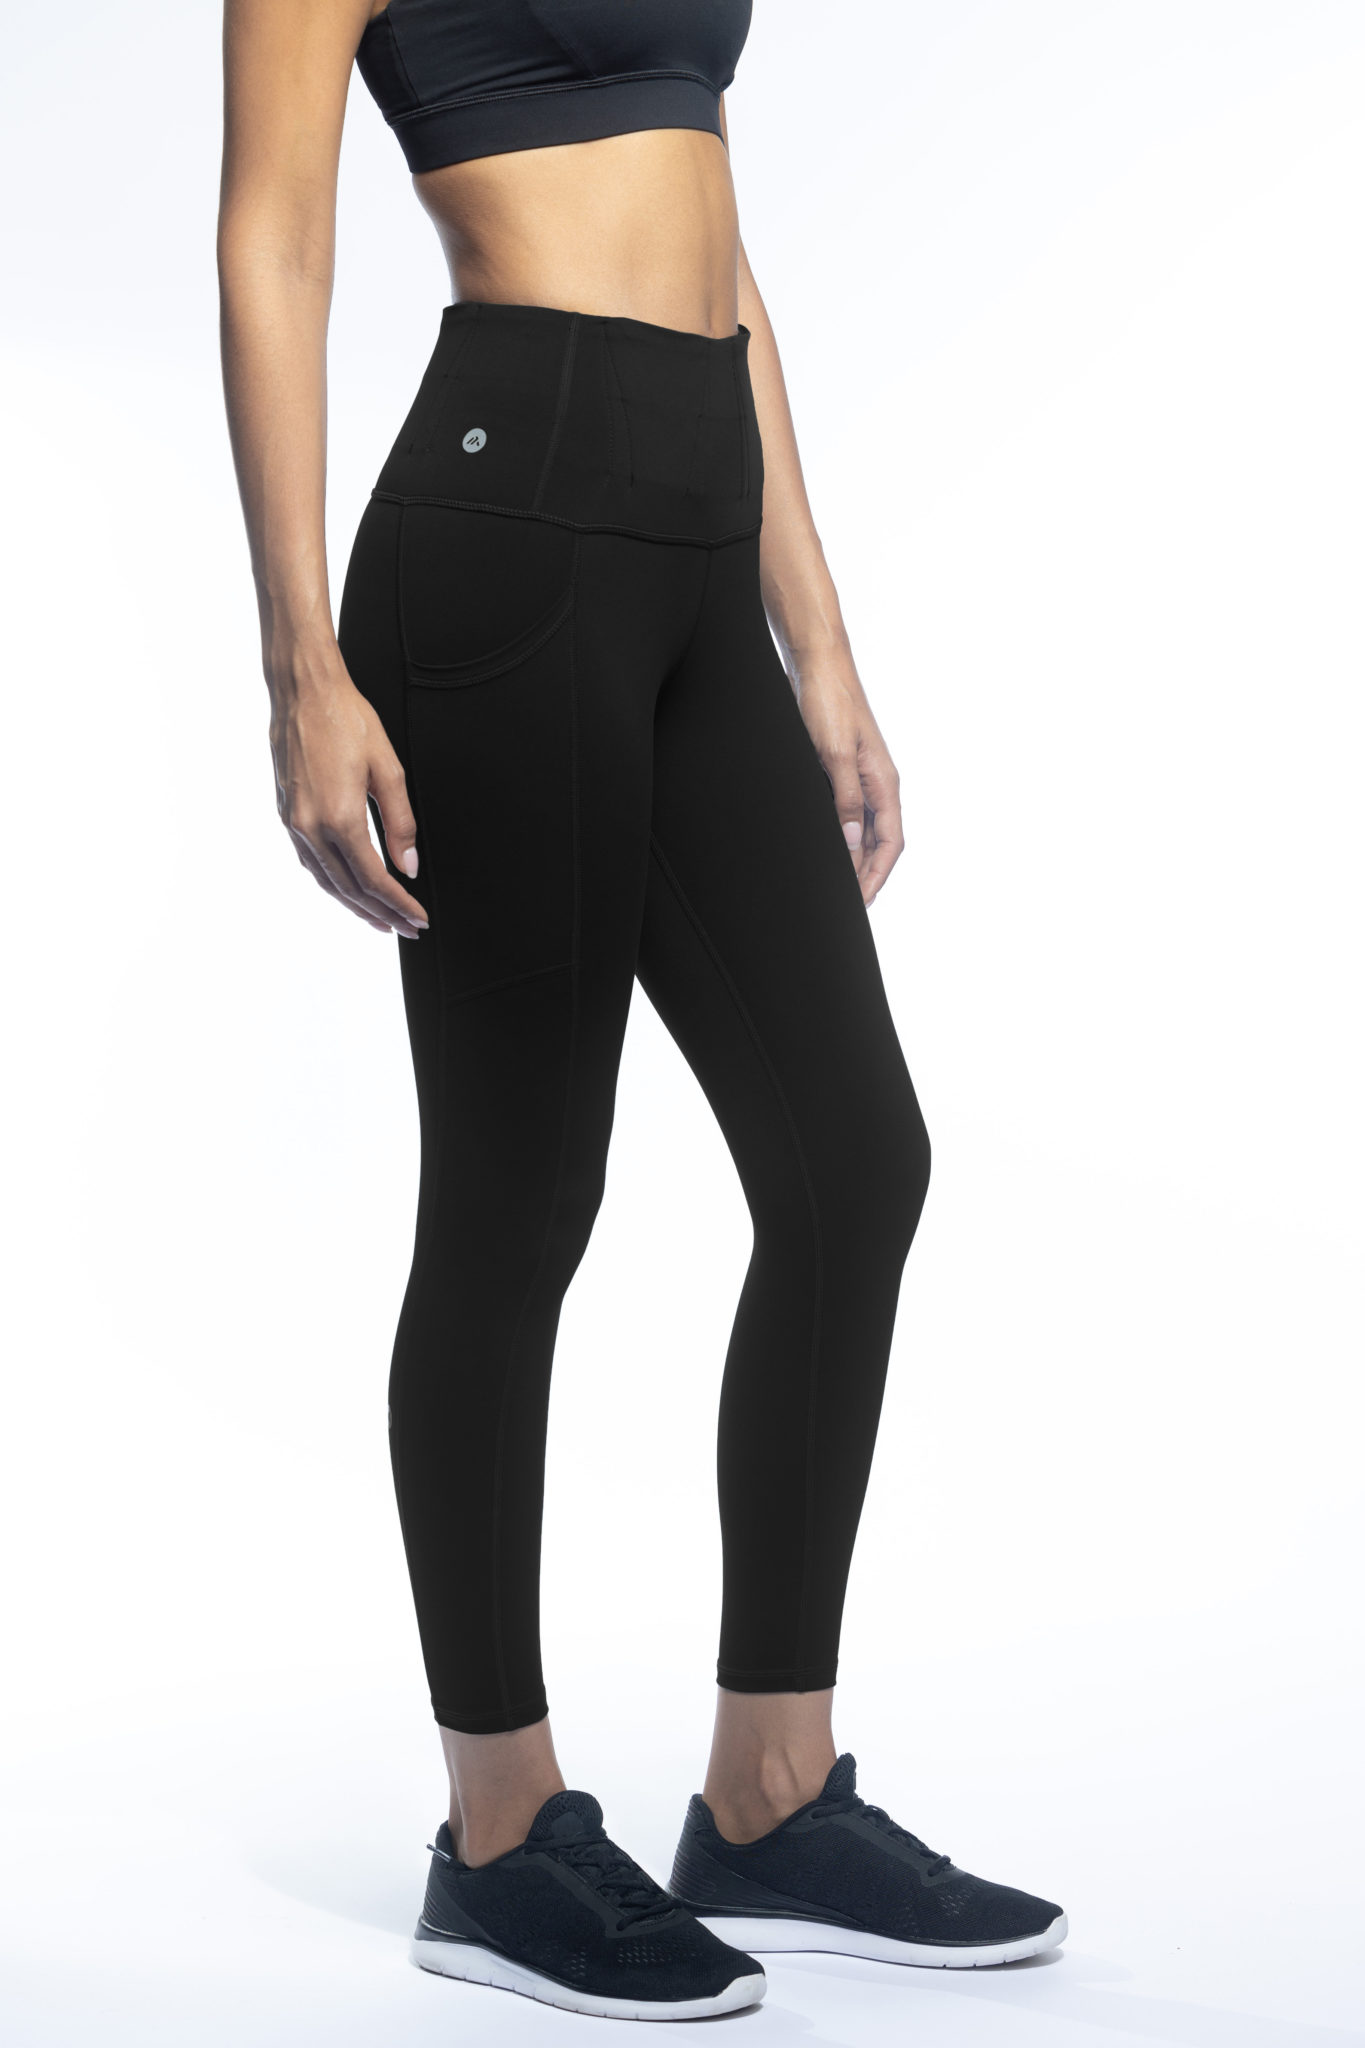 Fieldcraft Concealed Carry Leggings By: Alexo Athletica